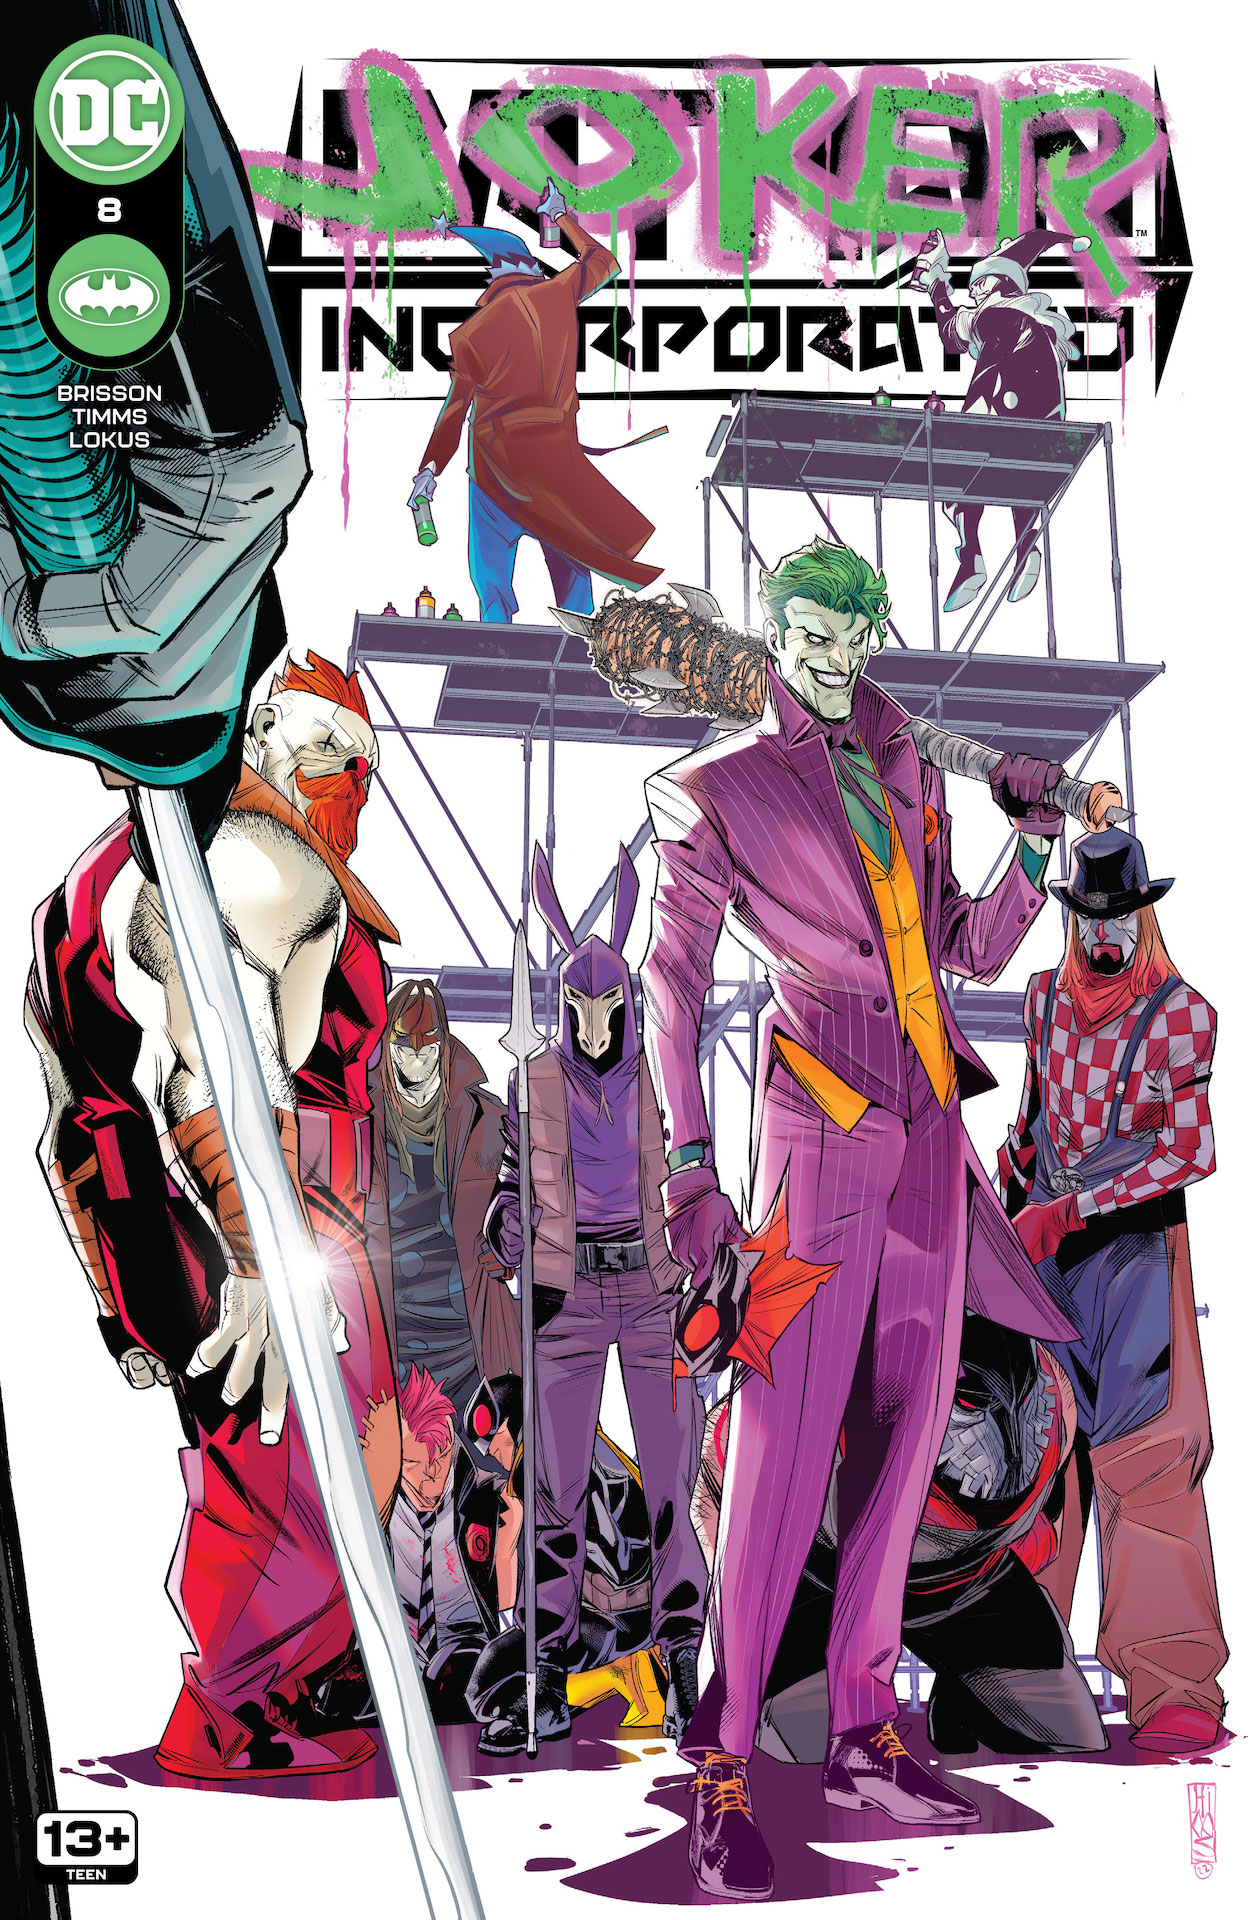 DC Preview: Batman Incorporated #8